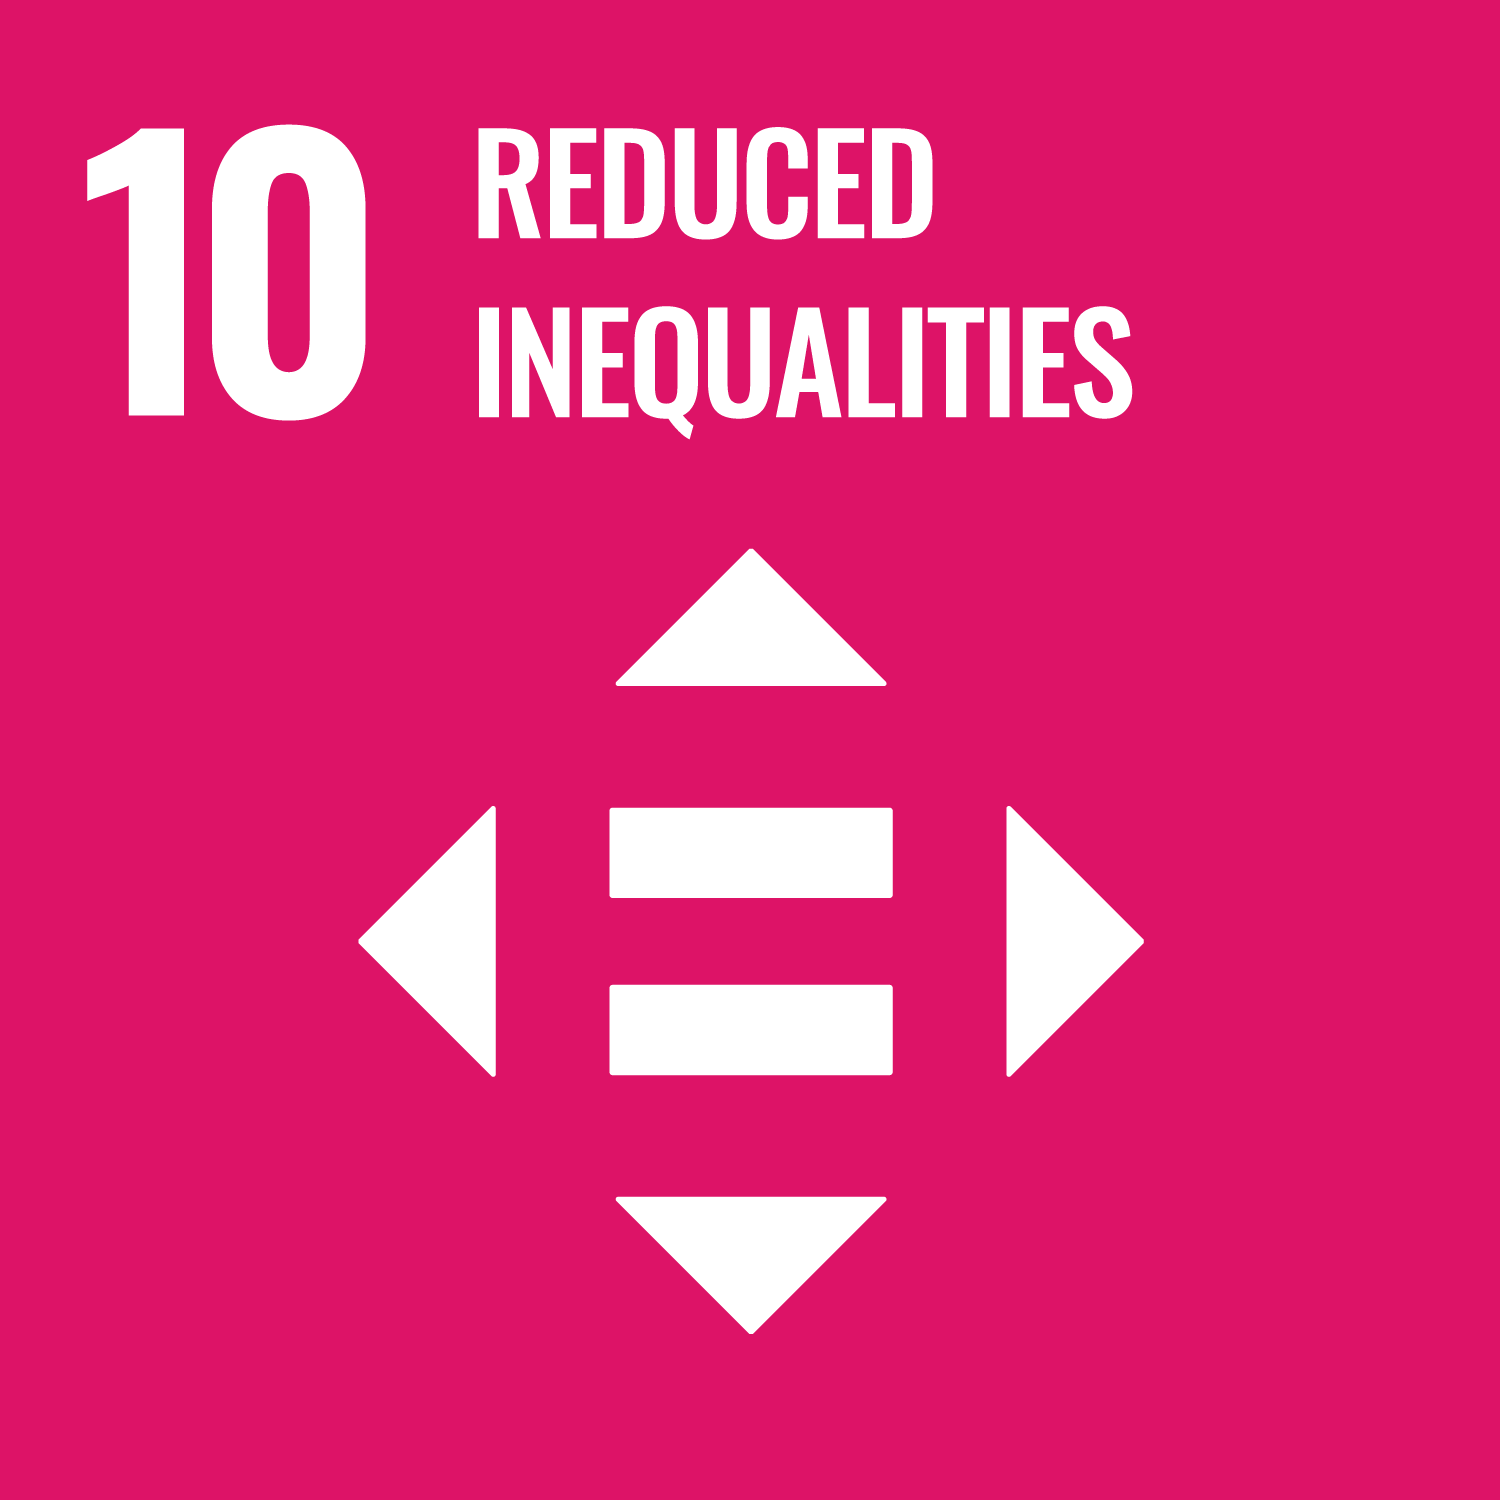 10. Reduce inequality within and among countries